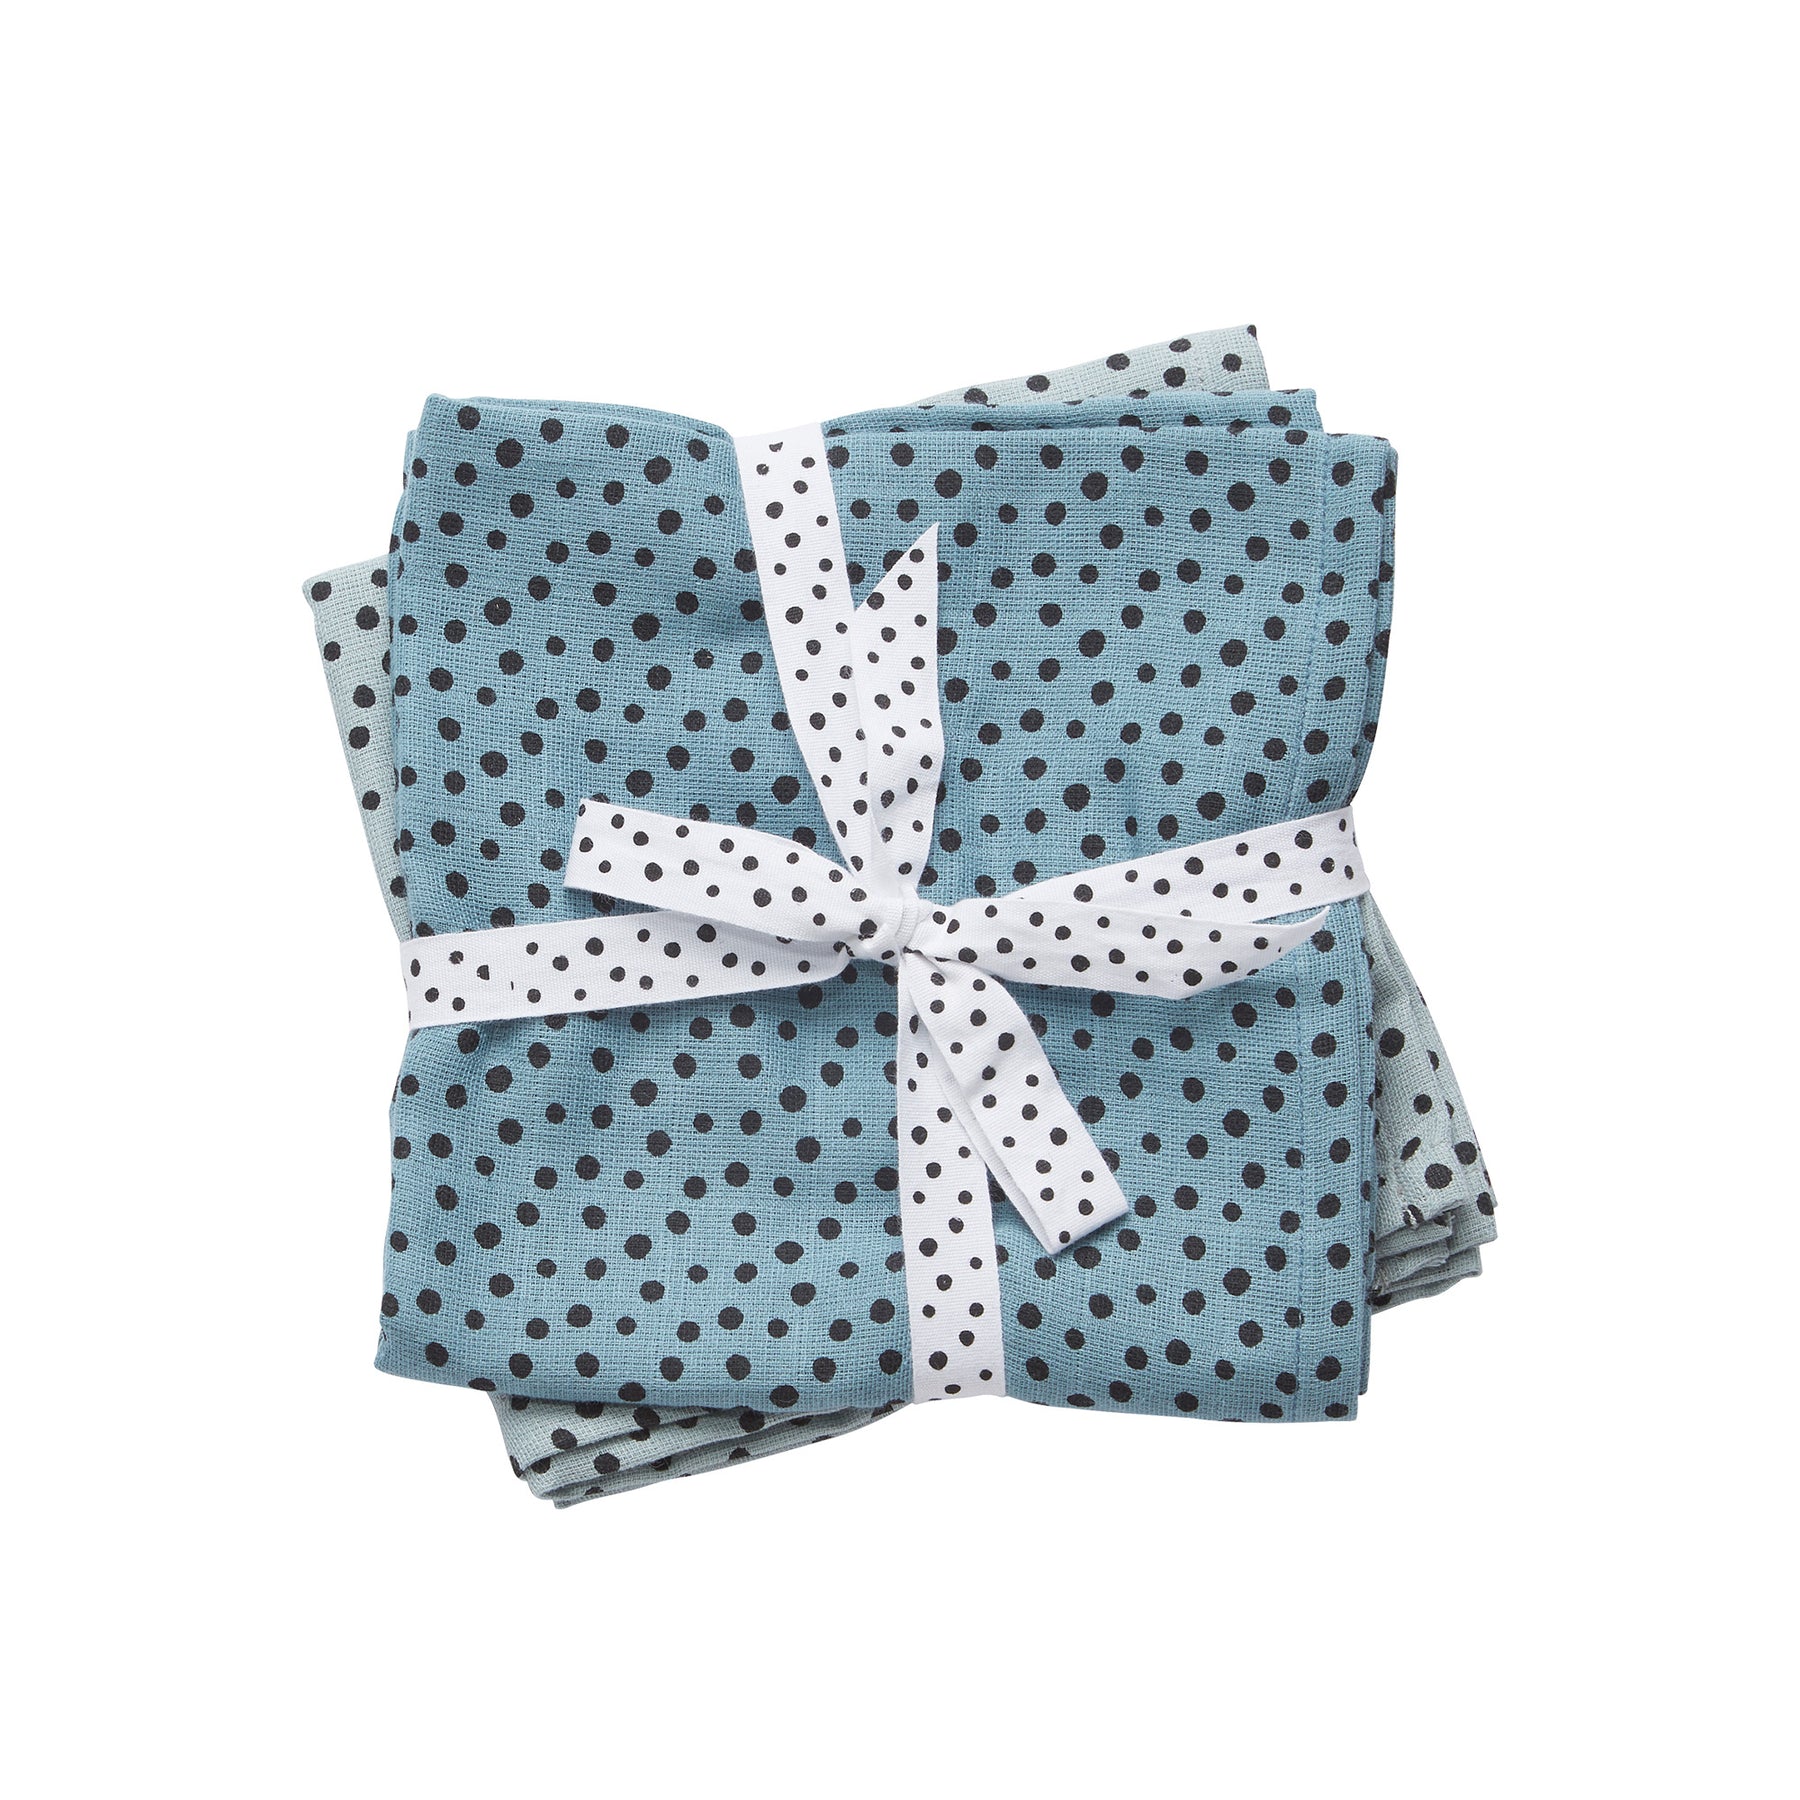 Swaddle 2-pack - Happy dots - Blue